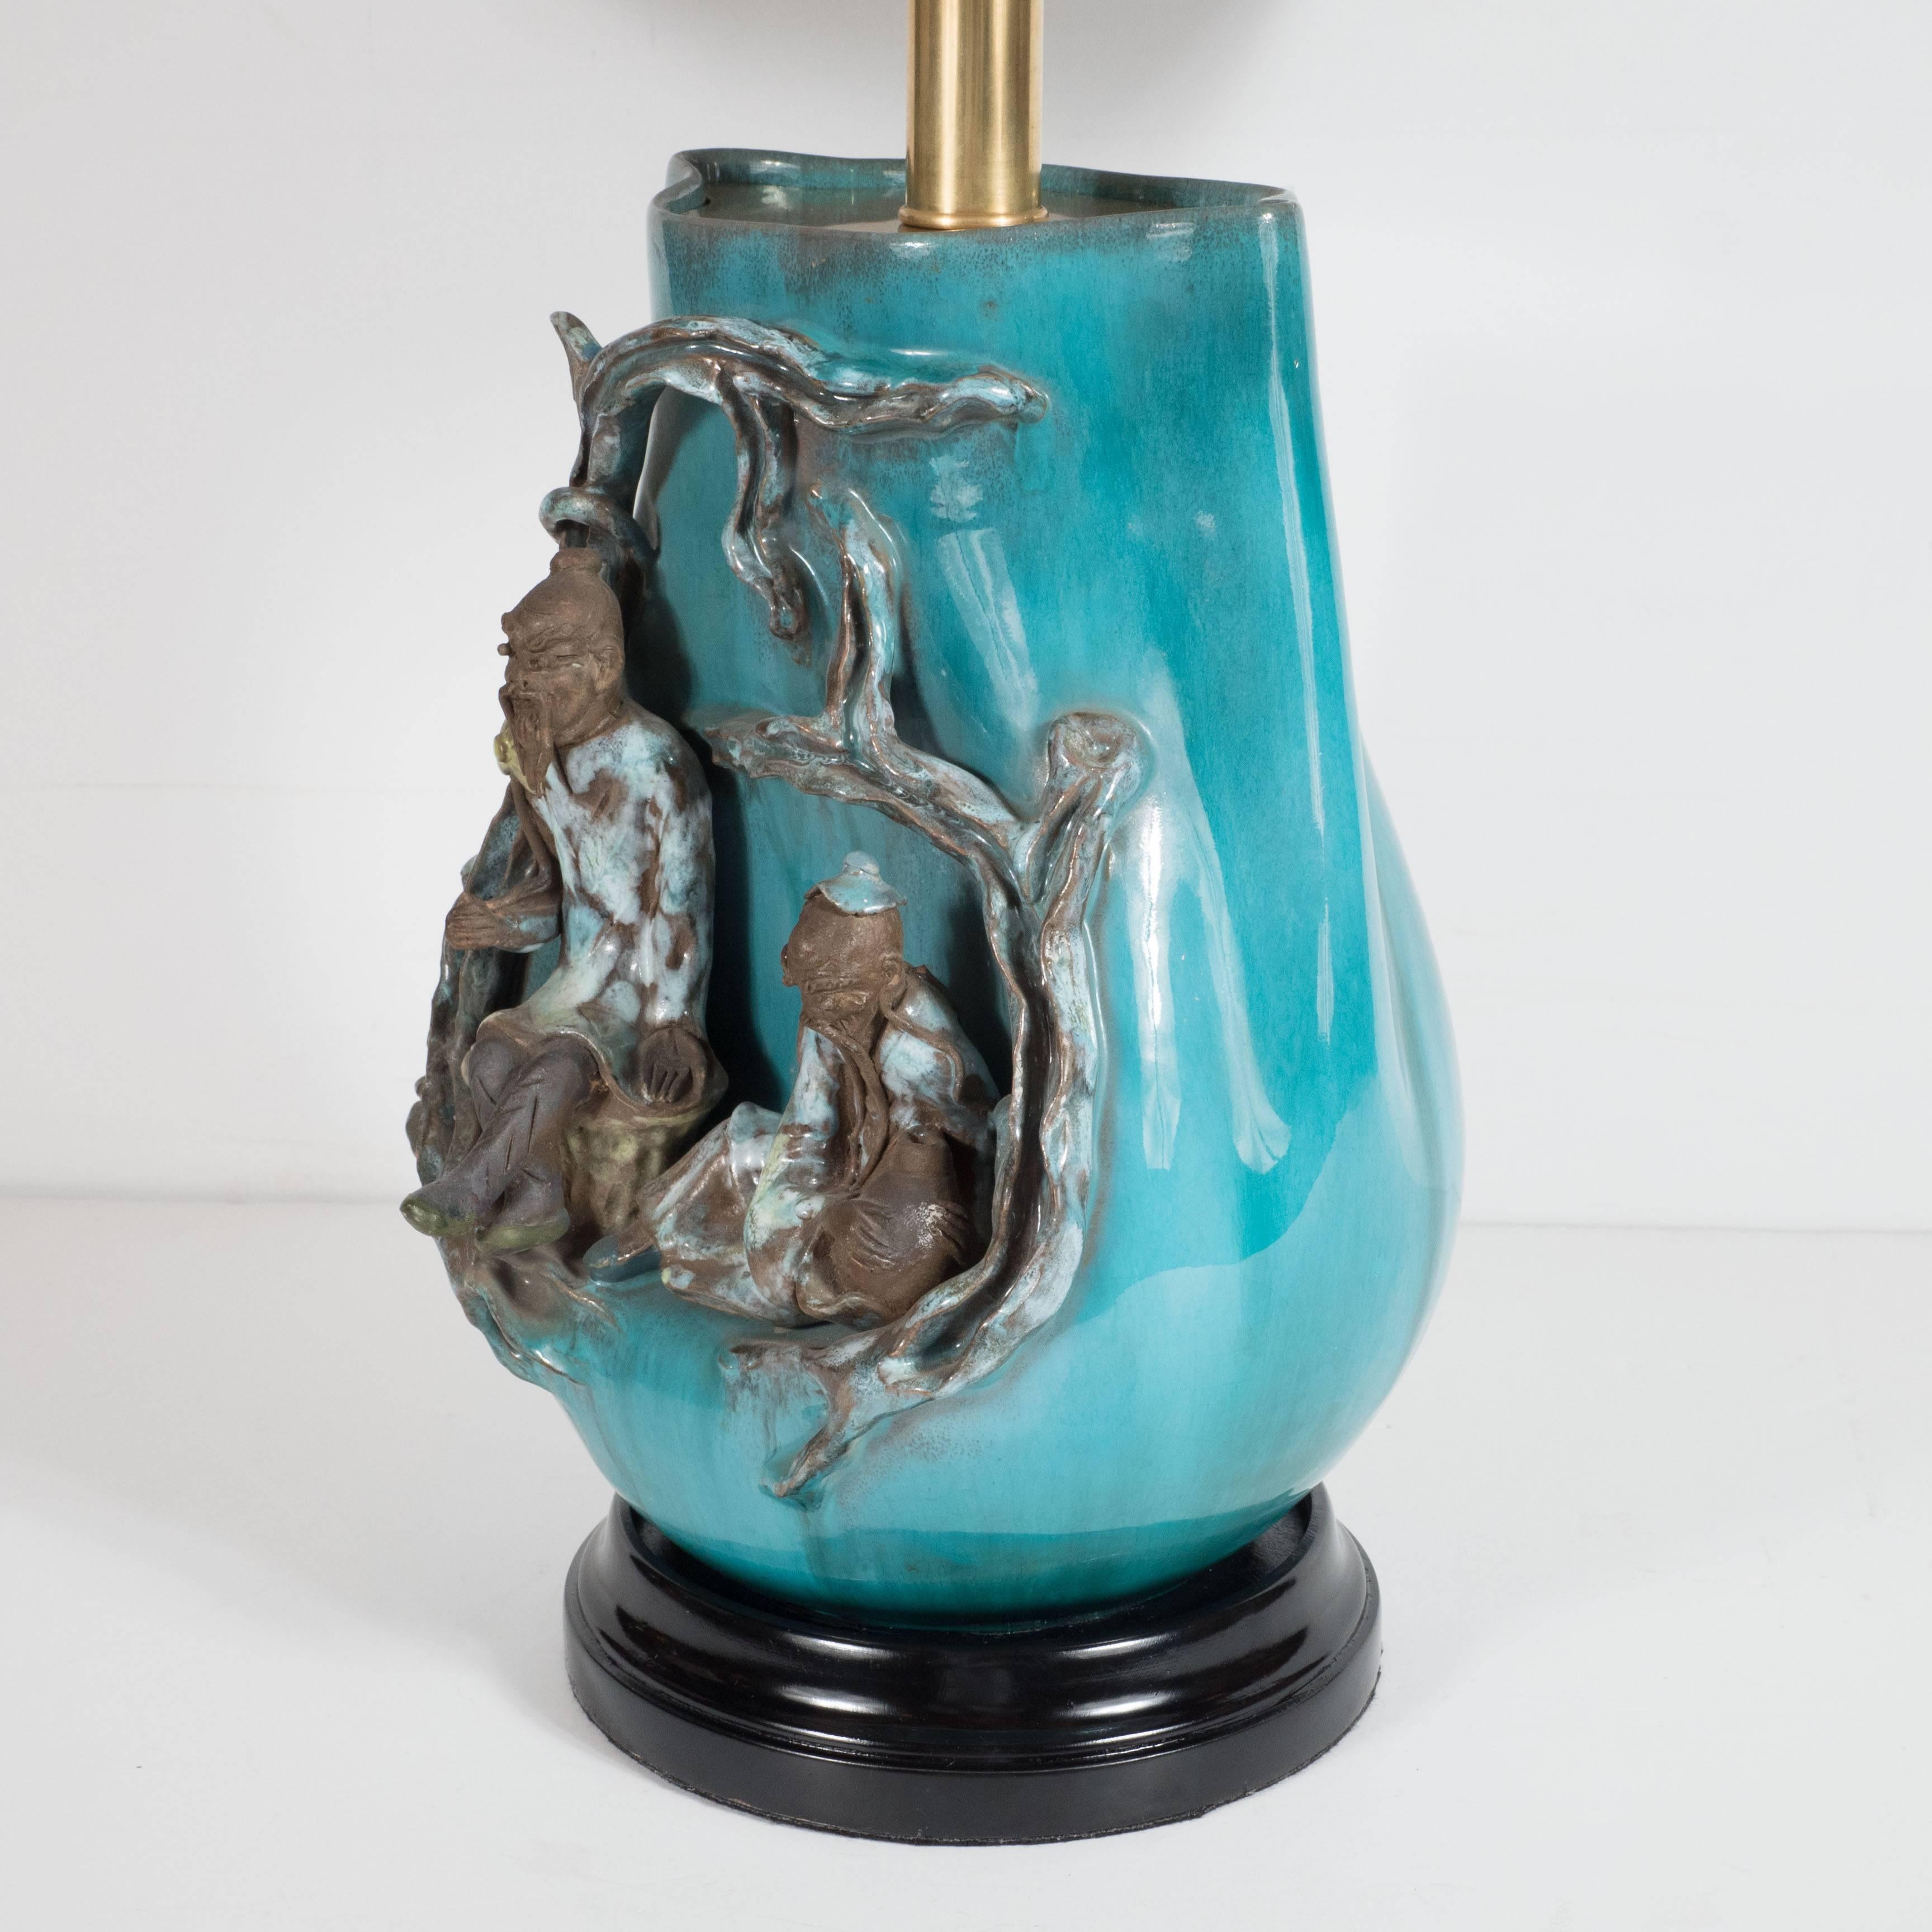 Mid-Century Modern table lamp by Marcello Fantoni in rich glazed vibrant turquoise blue stoneware, in the shape of a vase, intricately decorated with two wise men sitting under a tree the whole on an ebonized wooden stepped base, above a strikingly